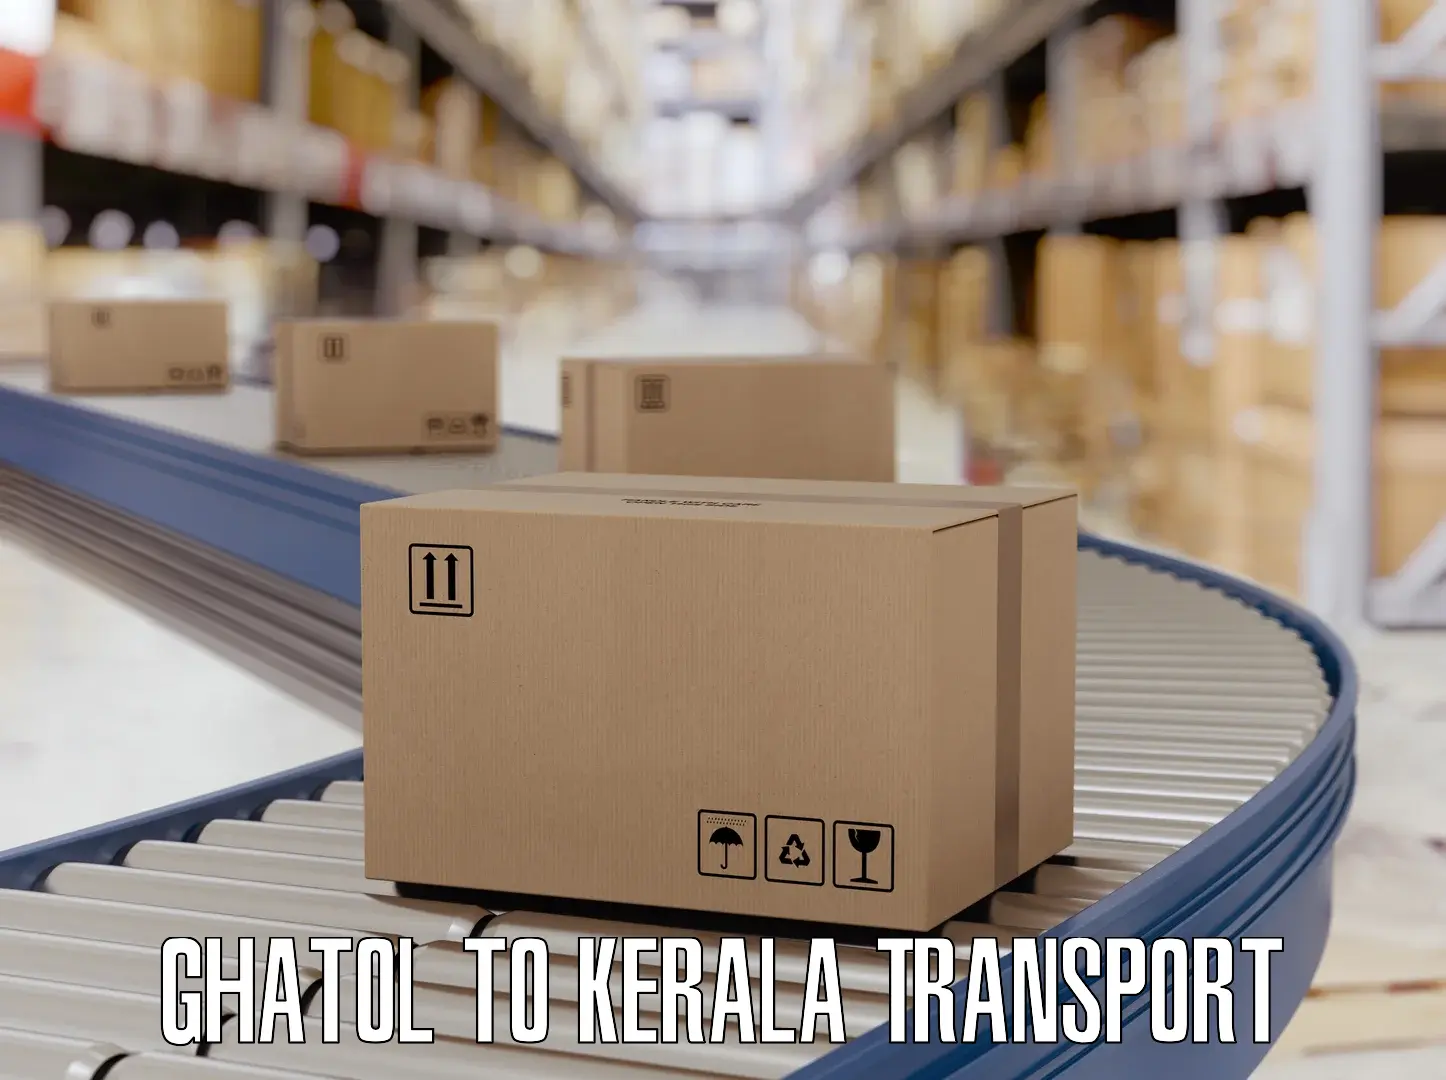 Vehicle parcel service Ghatol to Cochin University of Science and Technology